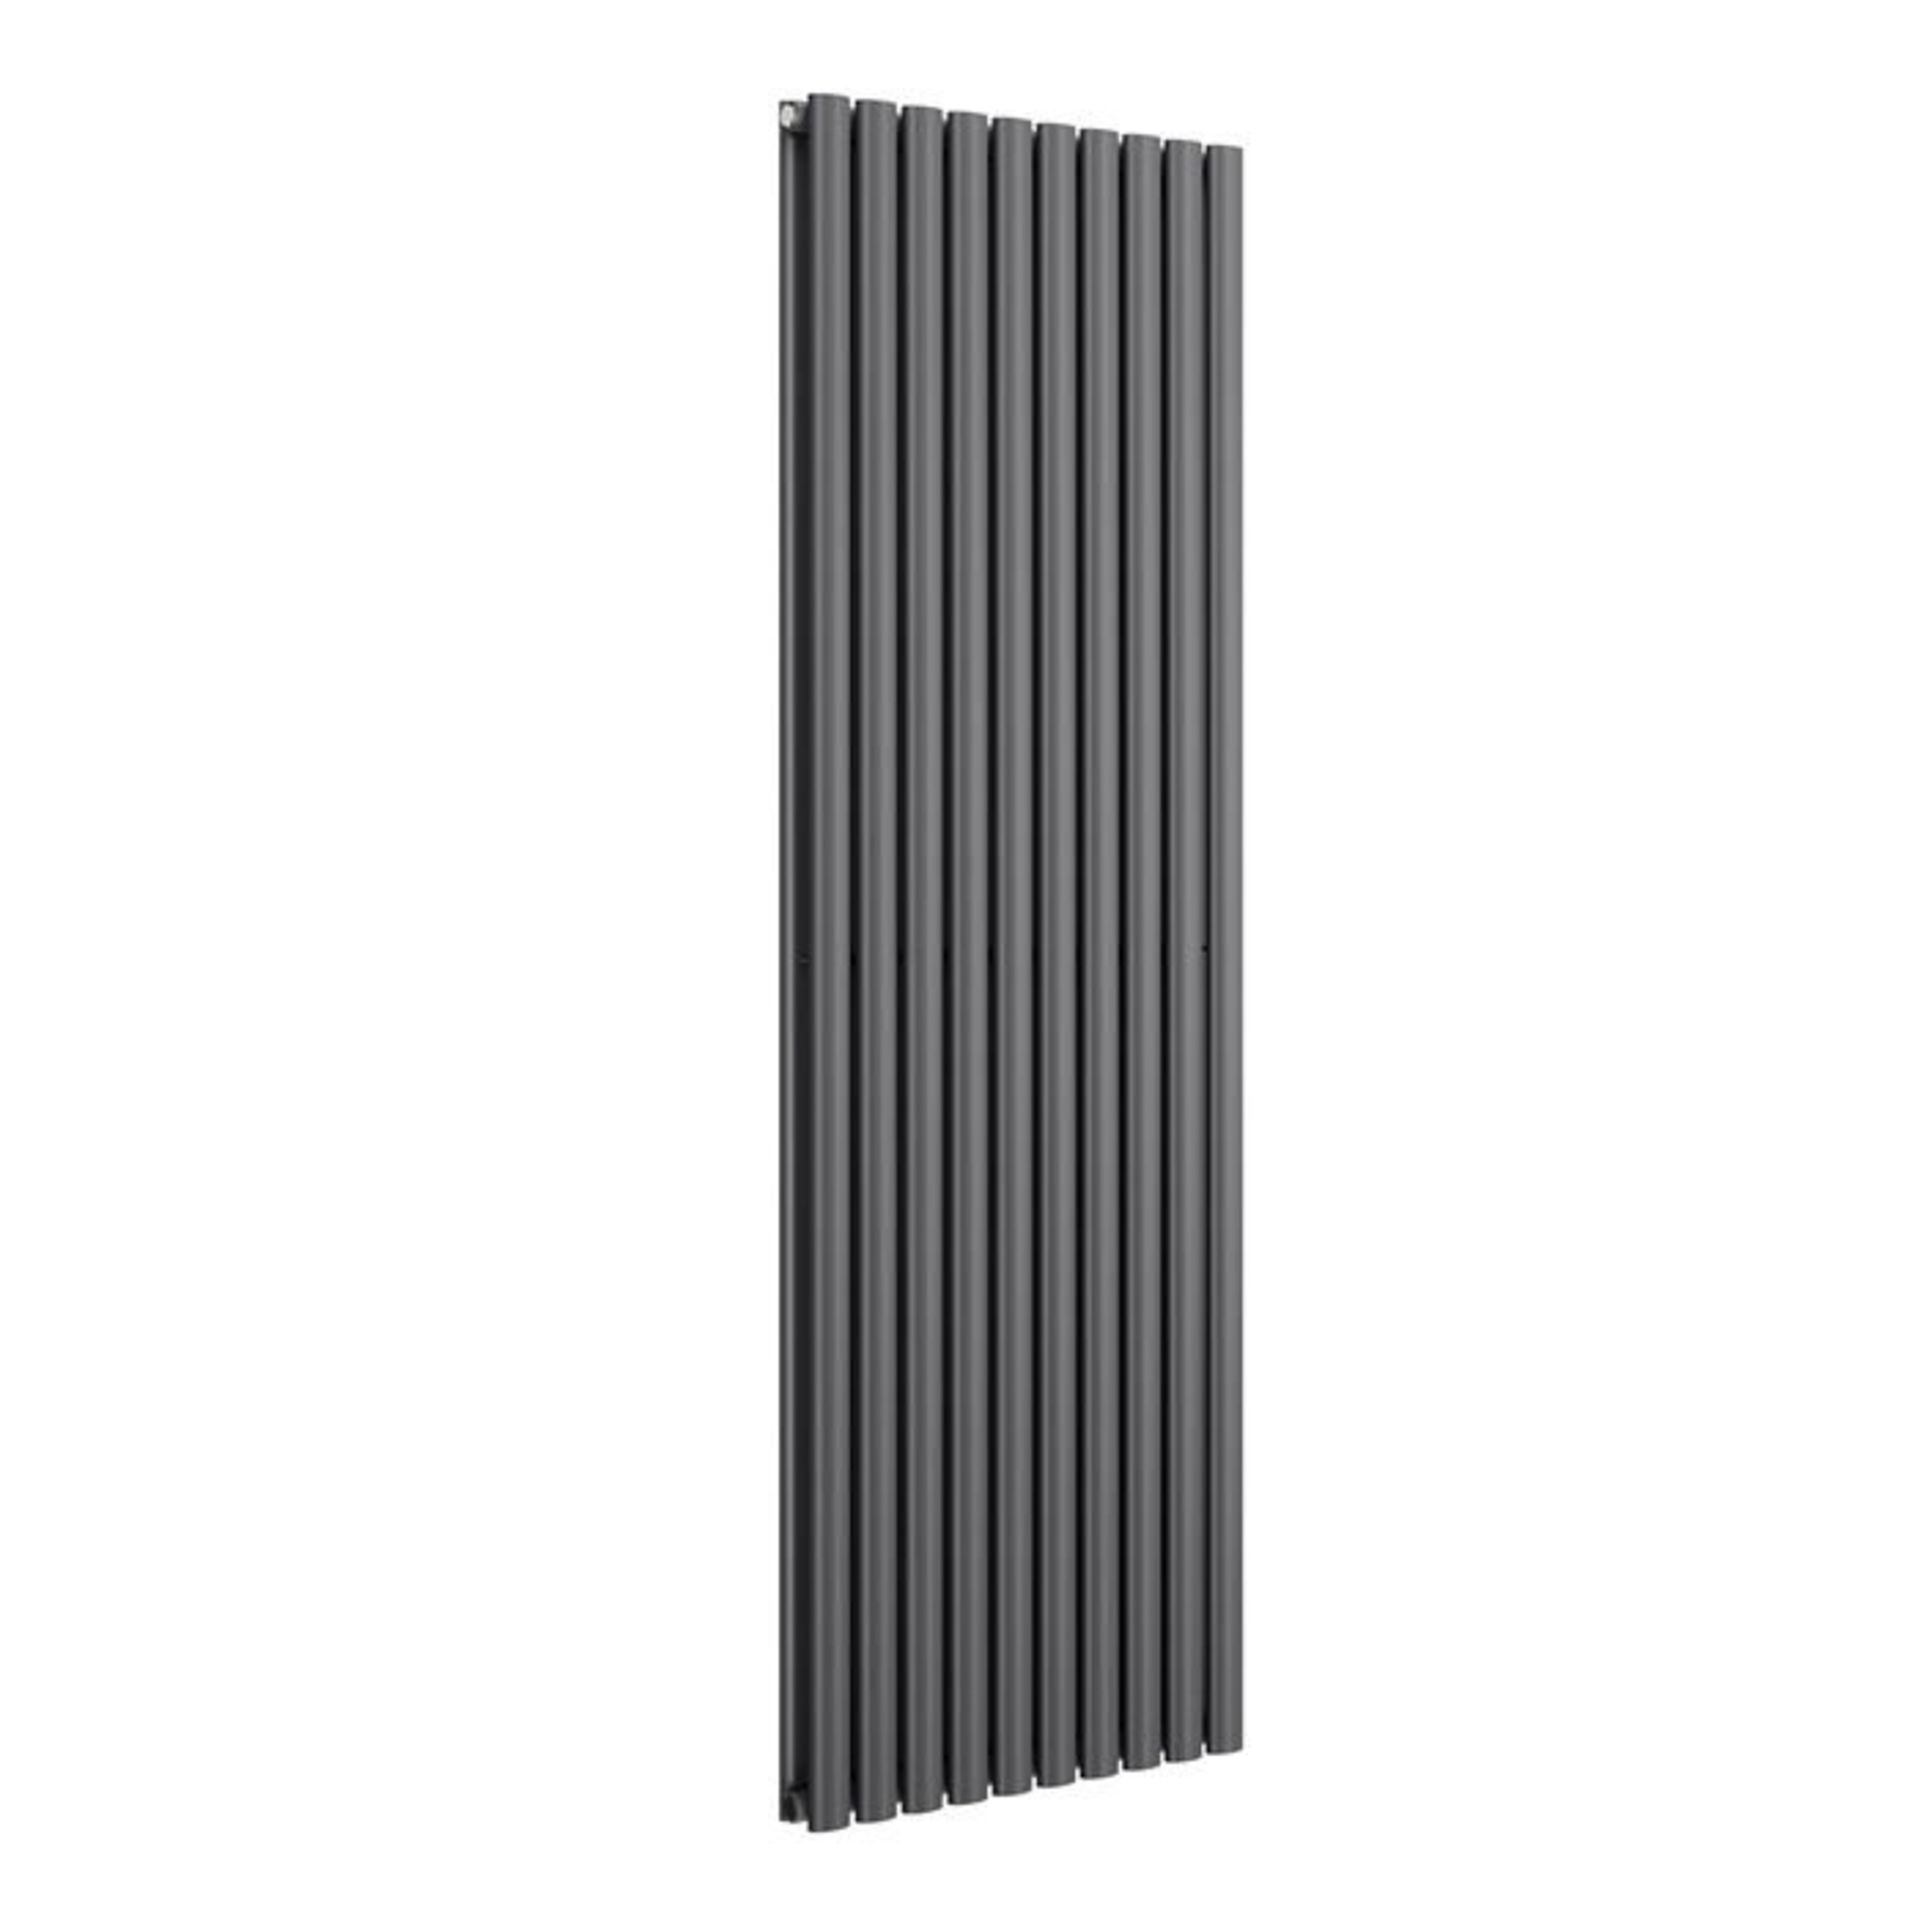 (S8) 1800x600mm Anthracite Double Panel Oval Tube Vertical Premium Radiator RRP £309.99 Low carbon - Image 3 of 3